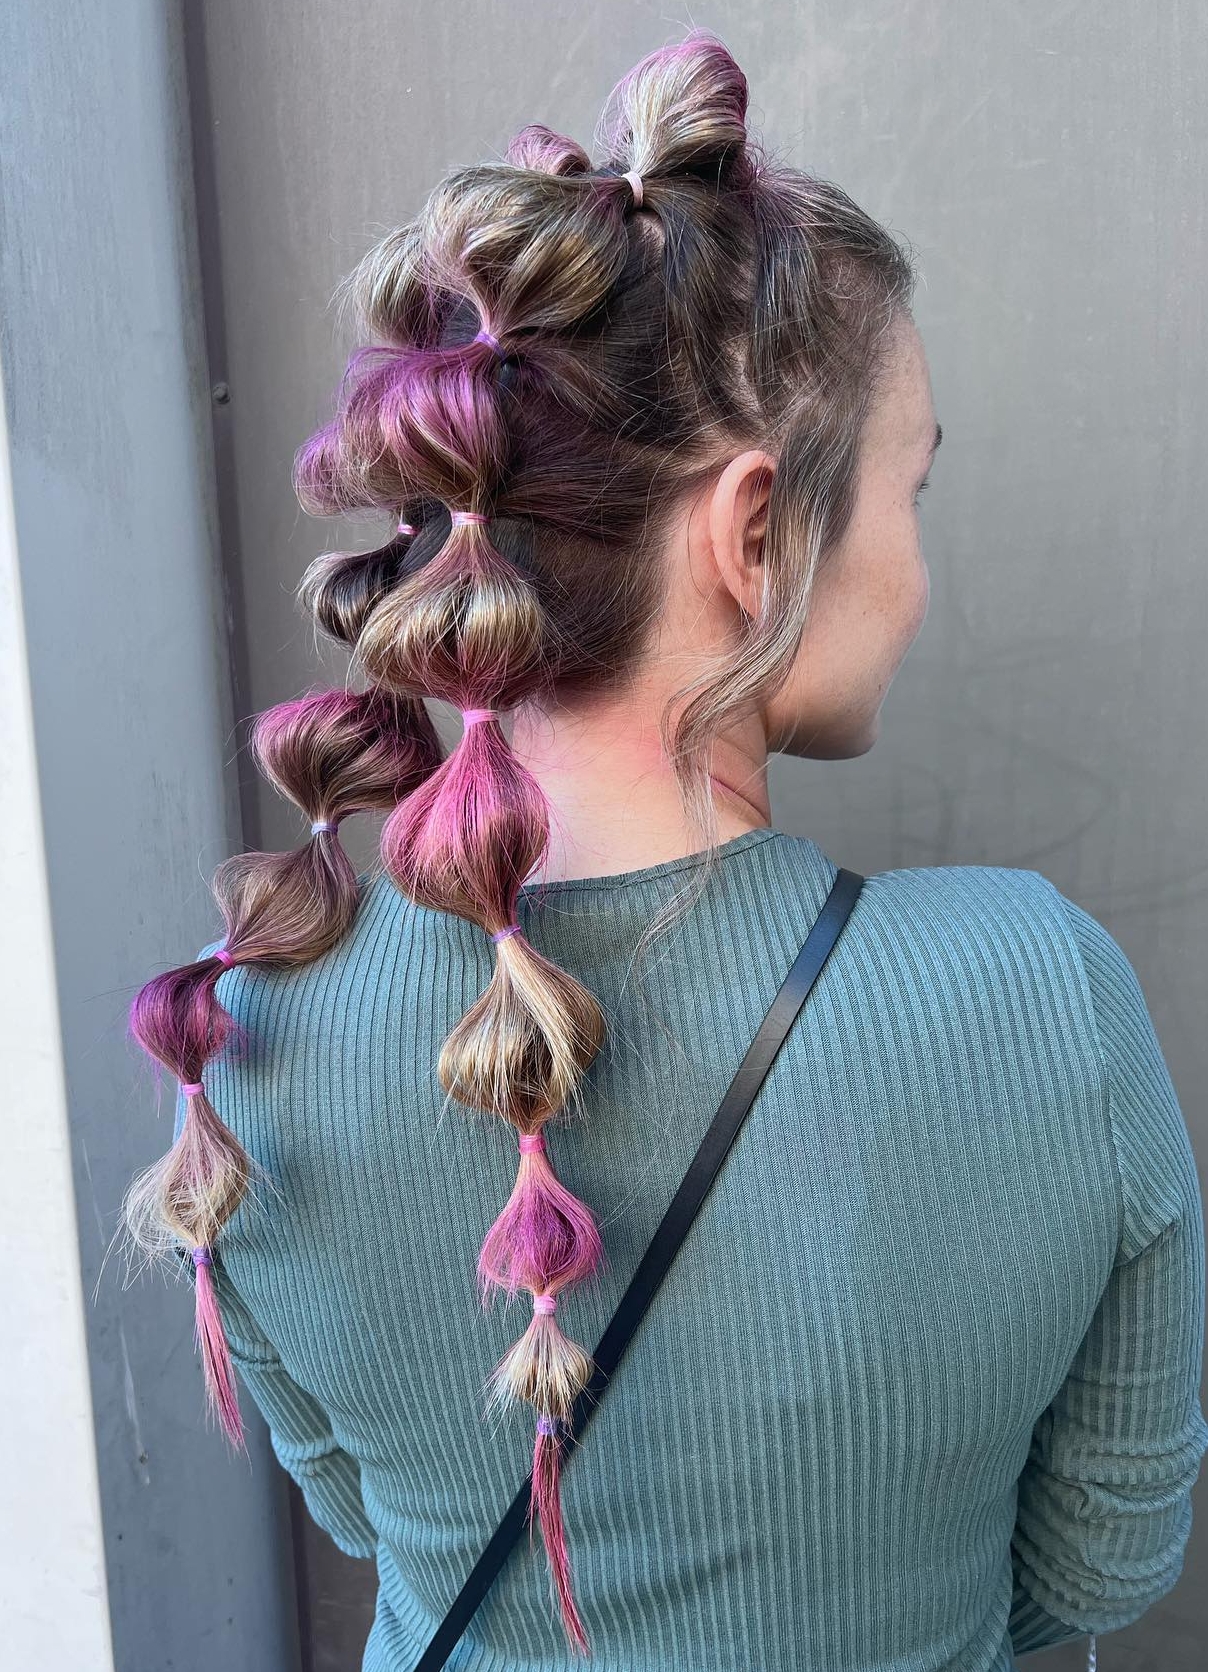 Pigtail Bubble Braids on Long Dark Hair with Pink Highlights